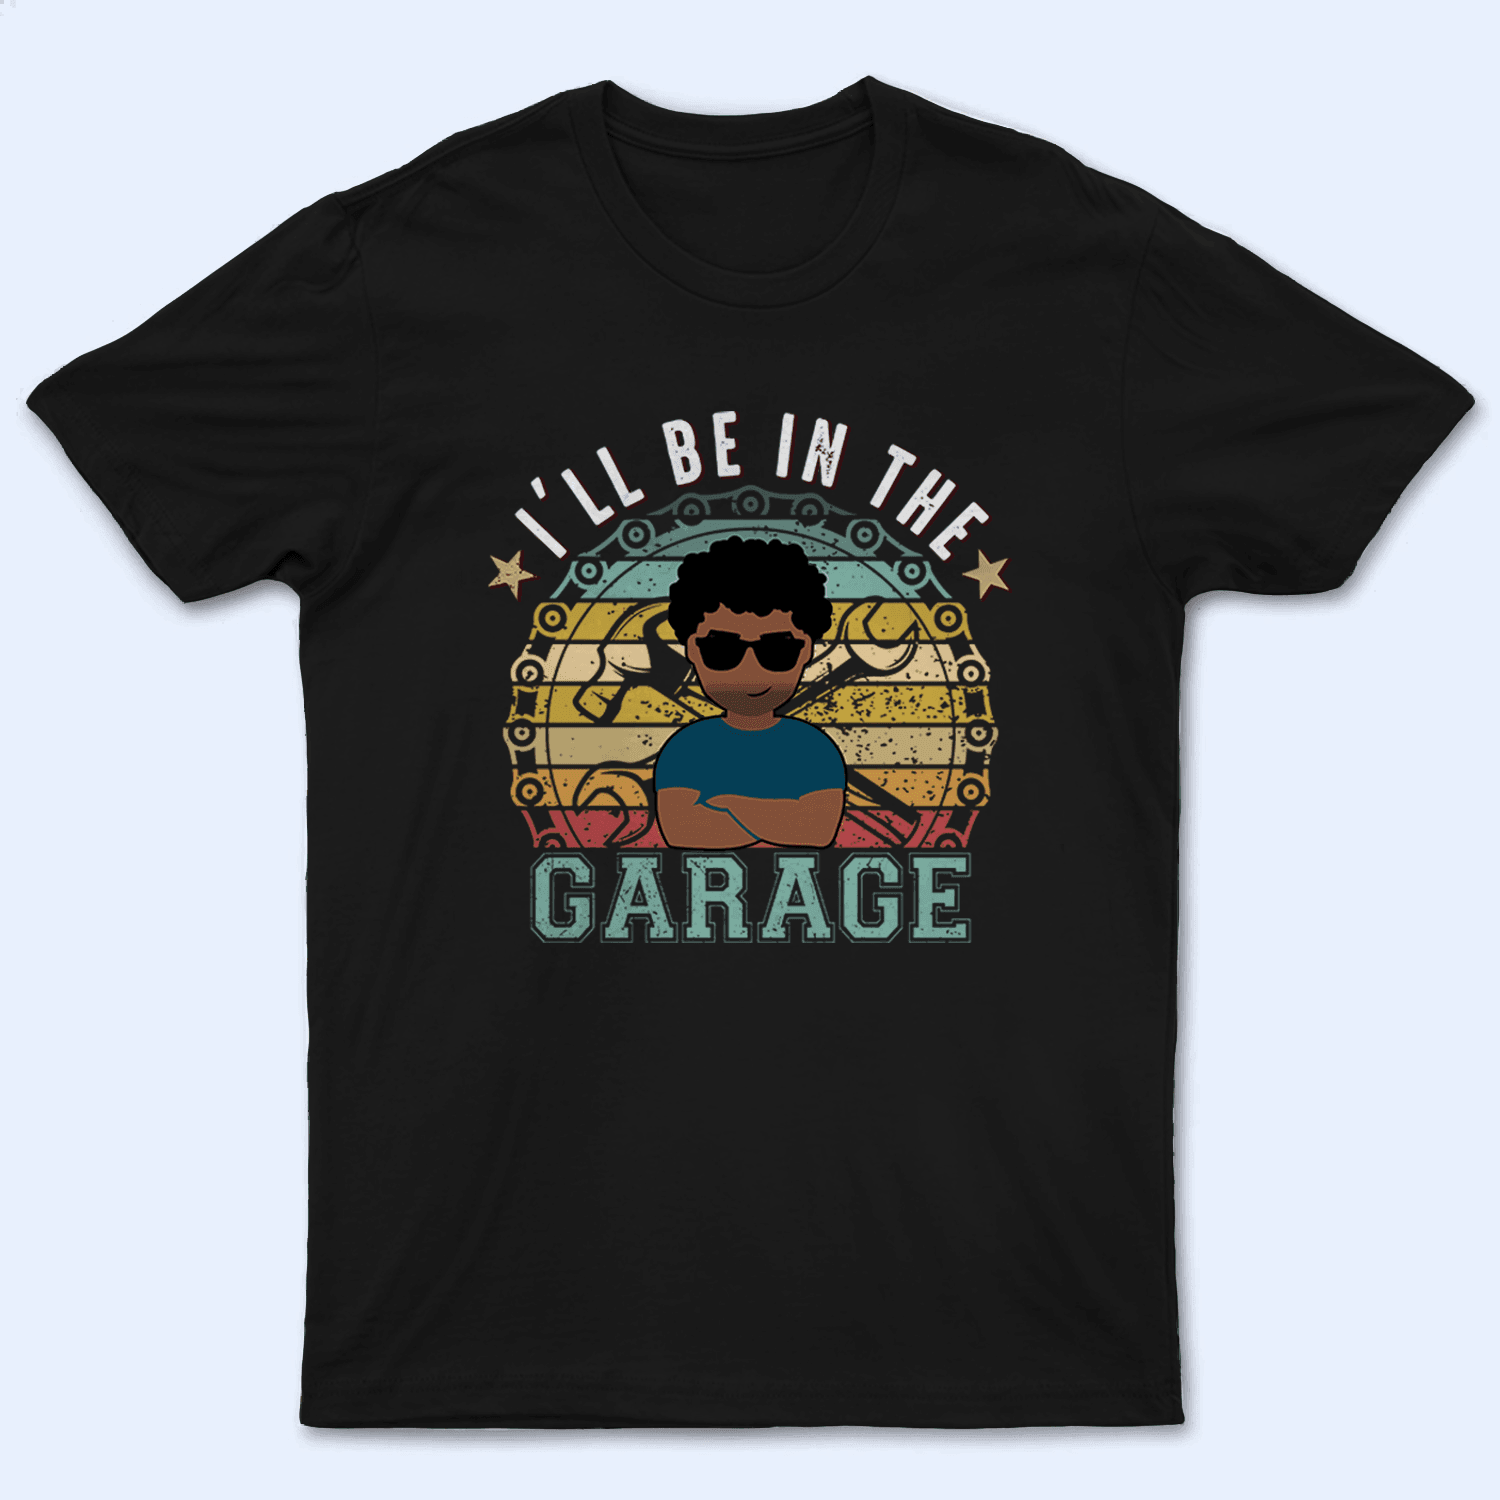 I'll Be In The Garage - Funny Fathers Day - Personalized Custom T Shirt - Birthday, Loving, Funny Gift for Grandfather/Dad/Father, Husband, Grandparent - Suzitee Store